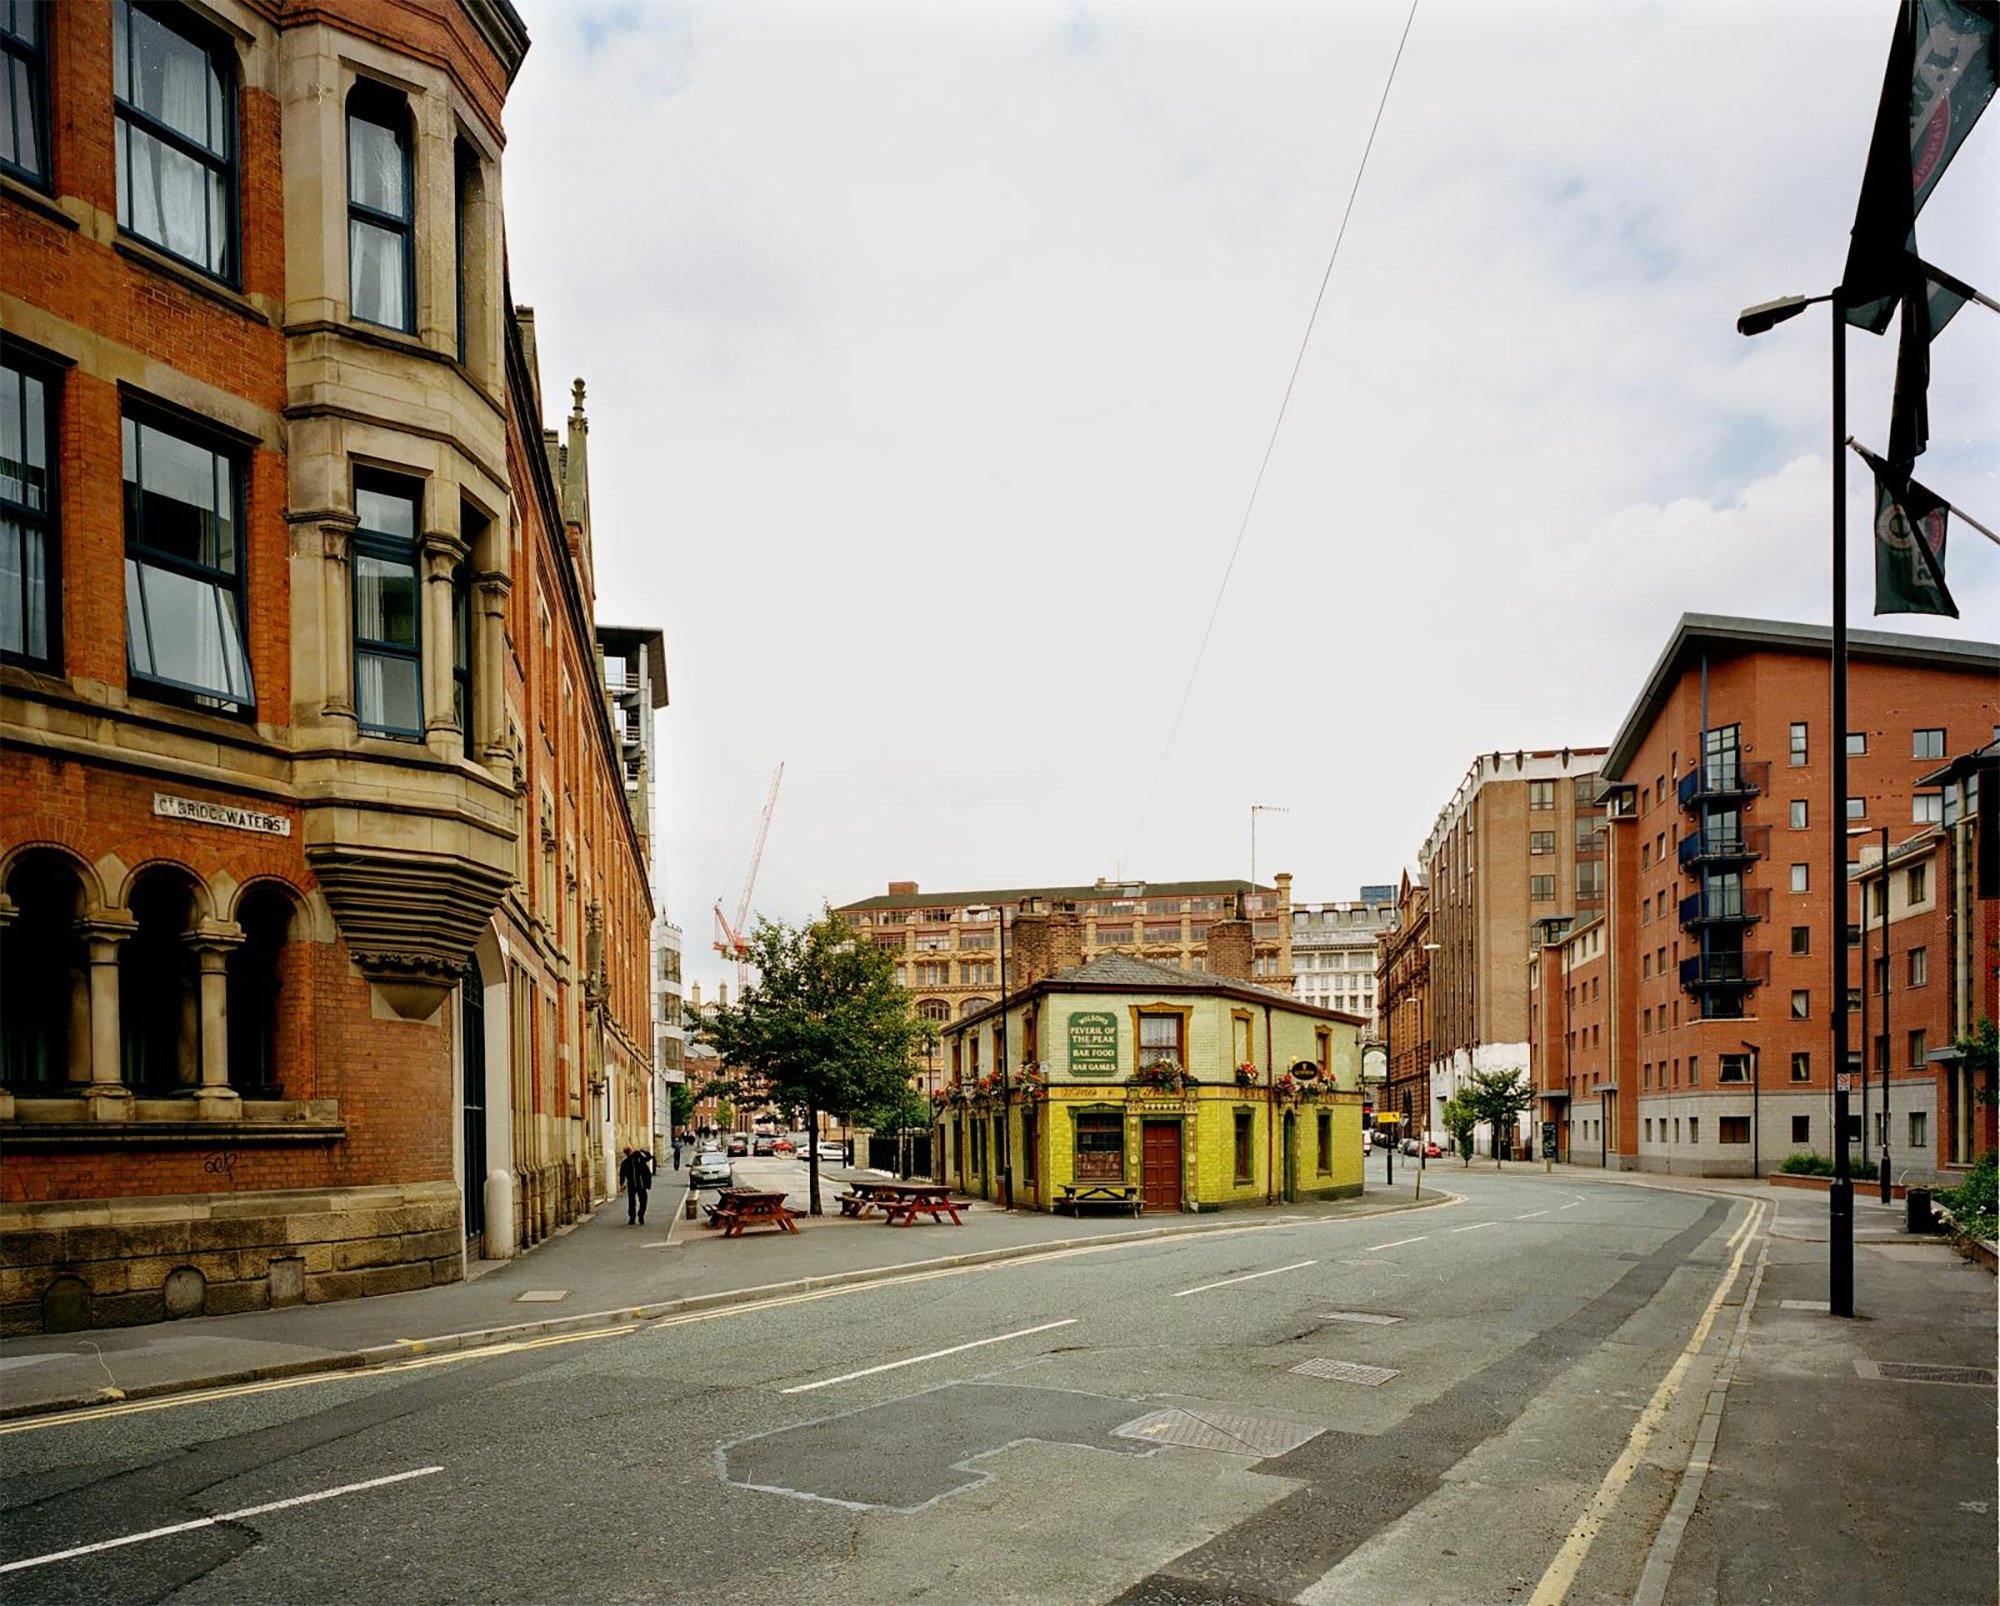 View of Peveril of the Peak pub in Manchester